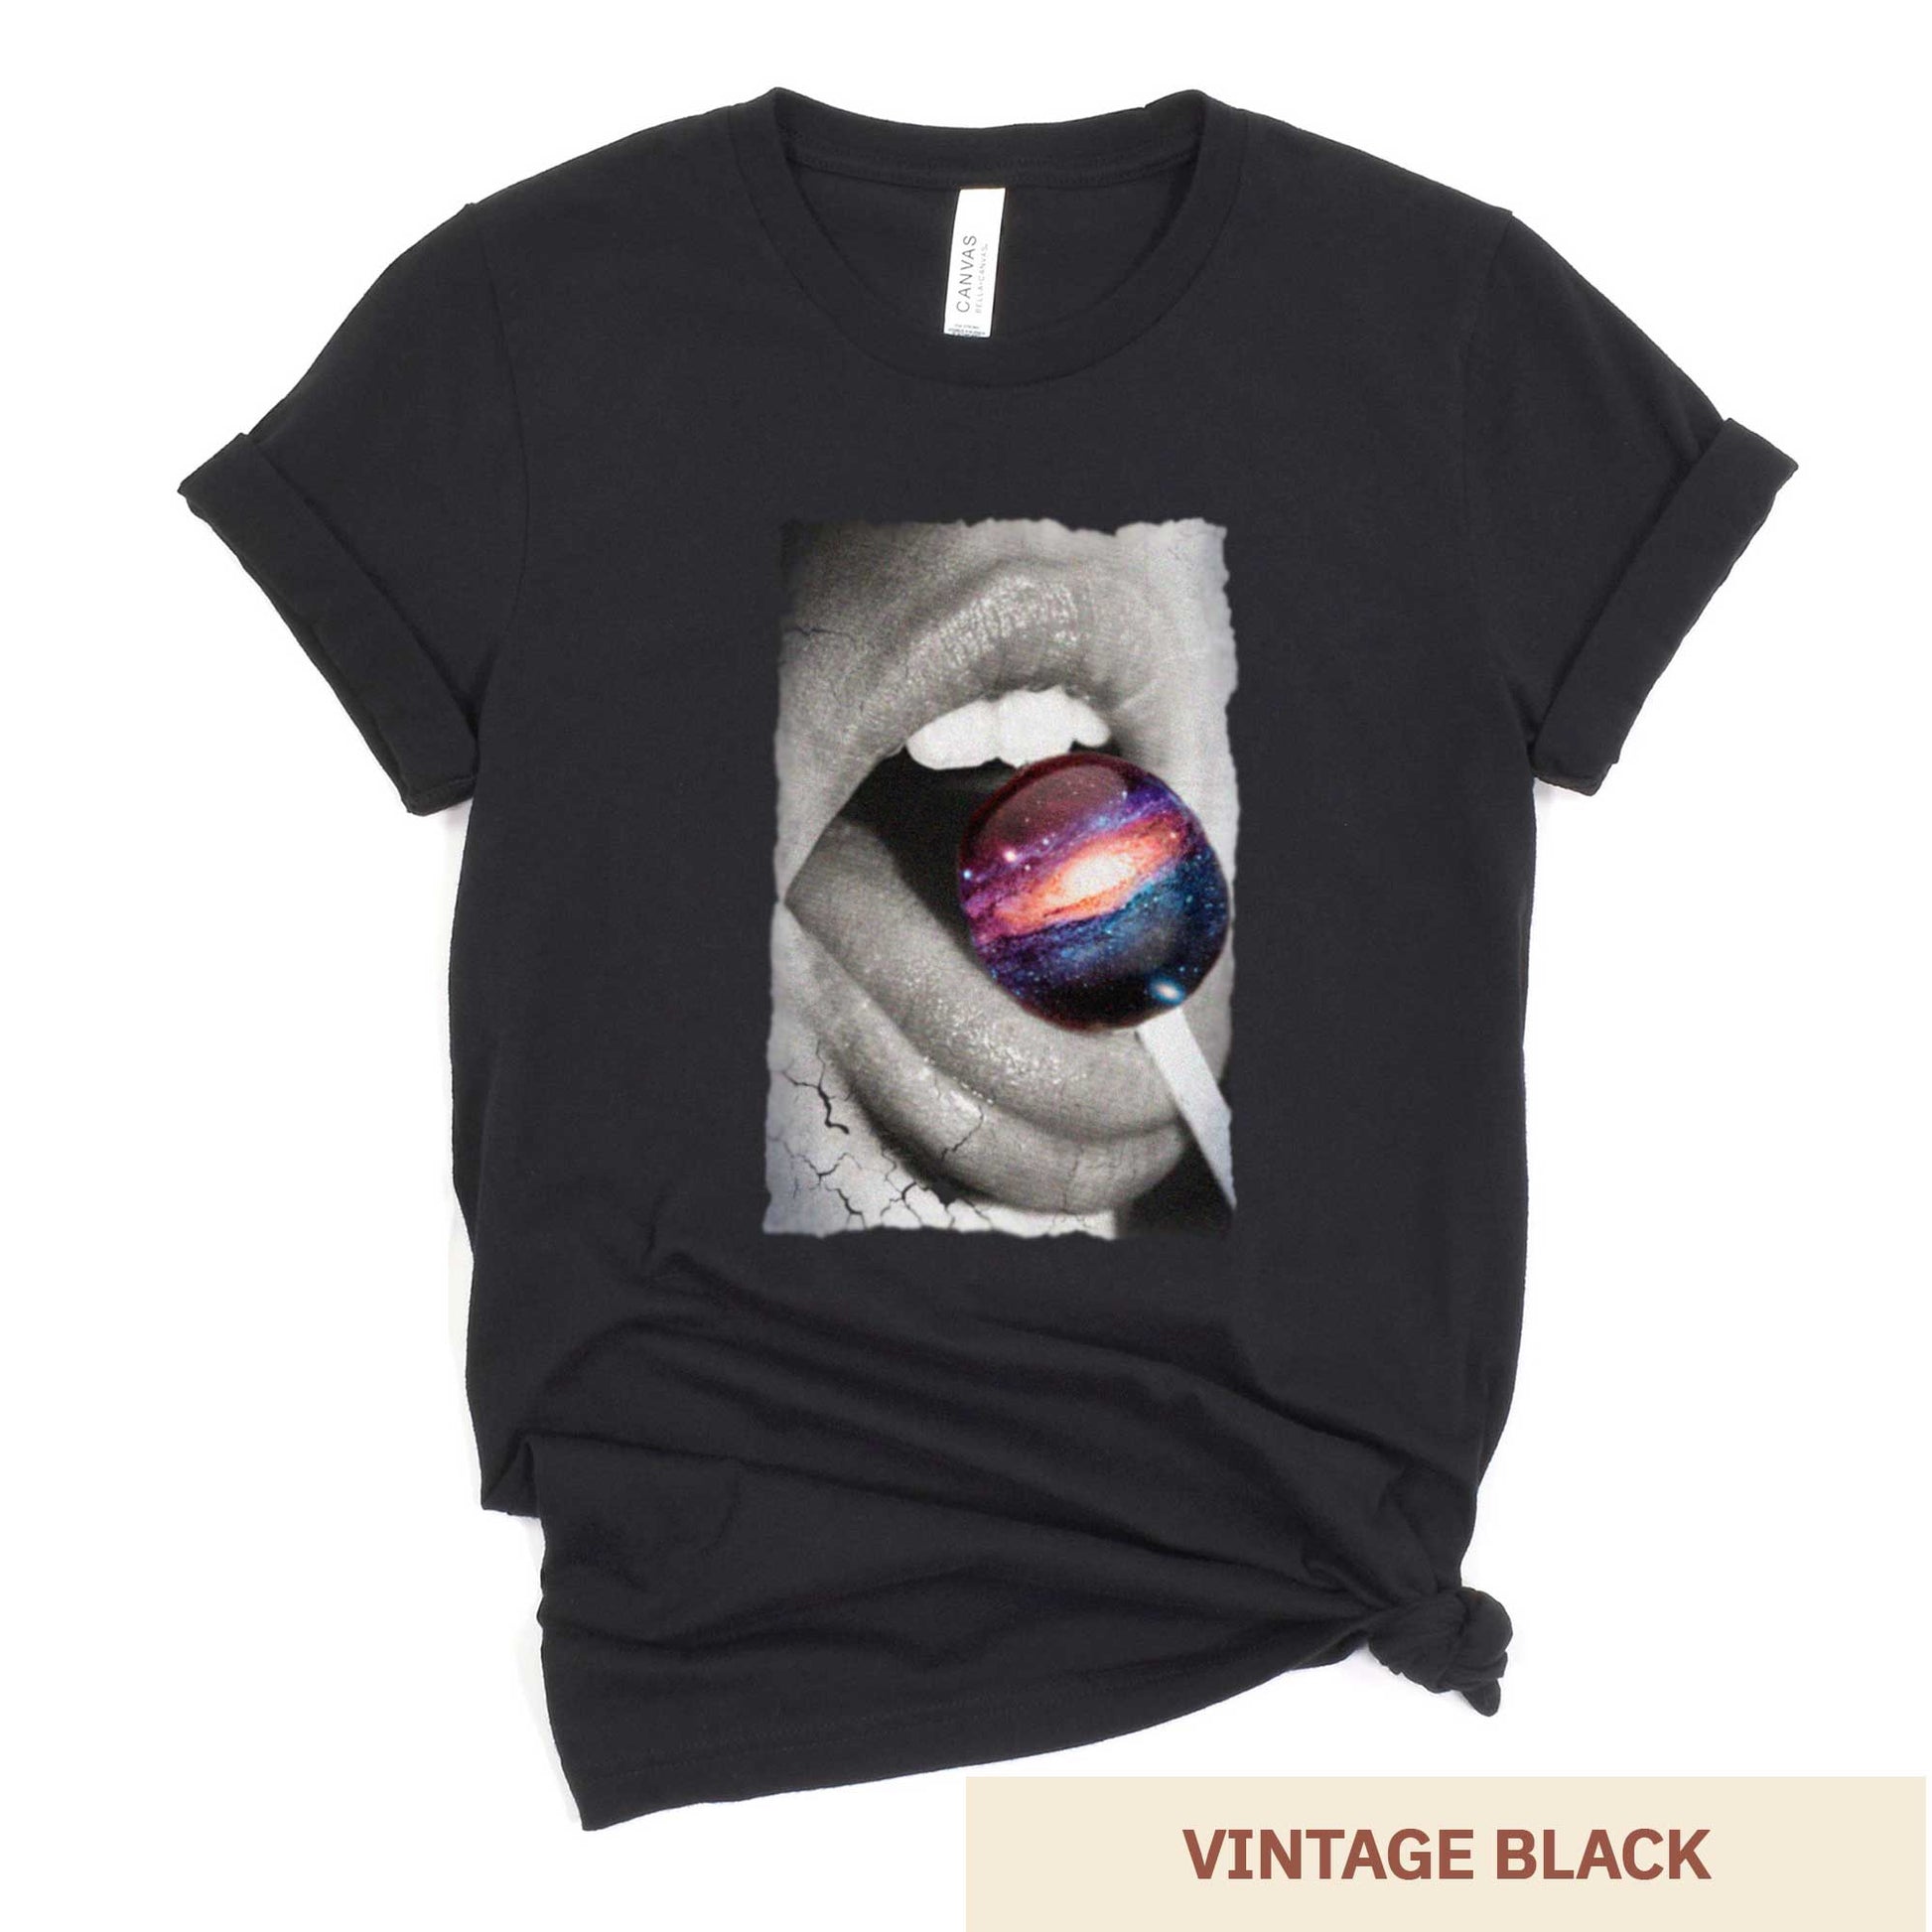 A vintage black Bella Canvas t-shirt with a black and white image of a woman's mouth eating a lollipop that looks like a swirling galaxy.